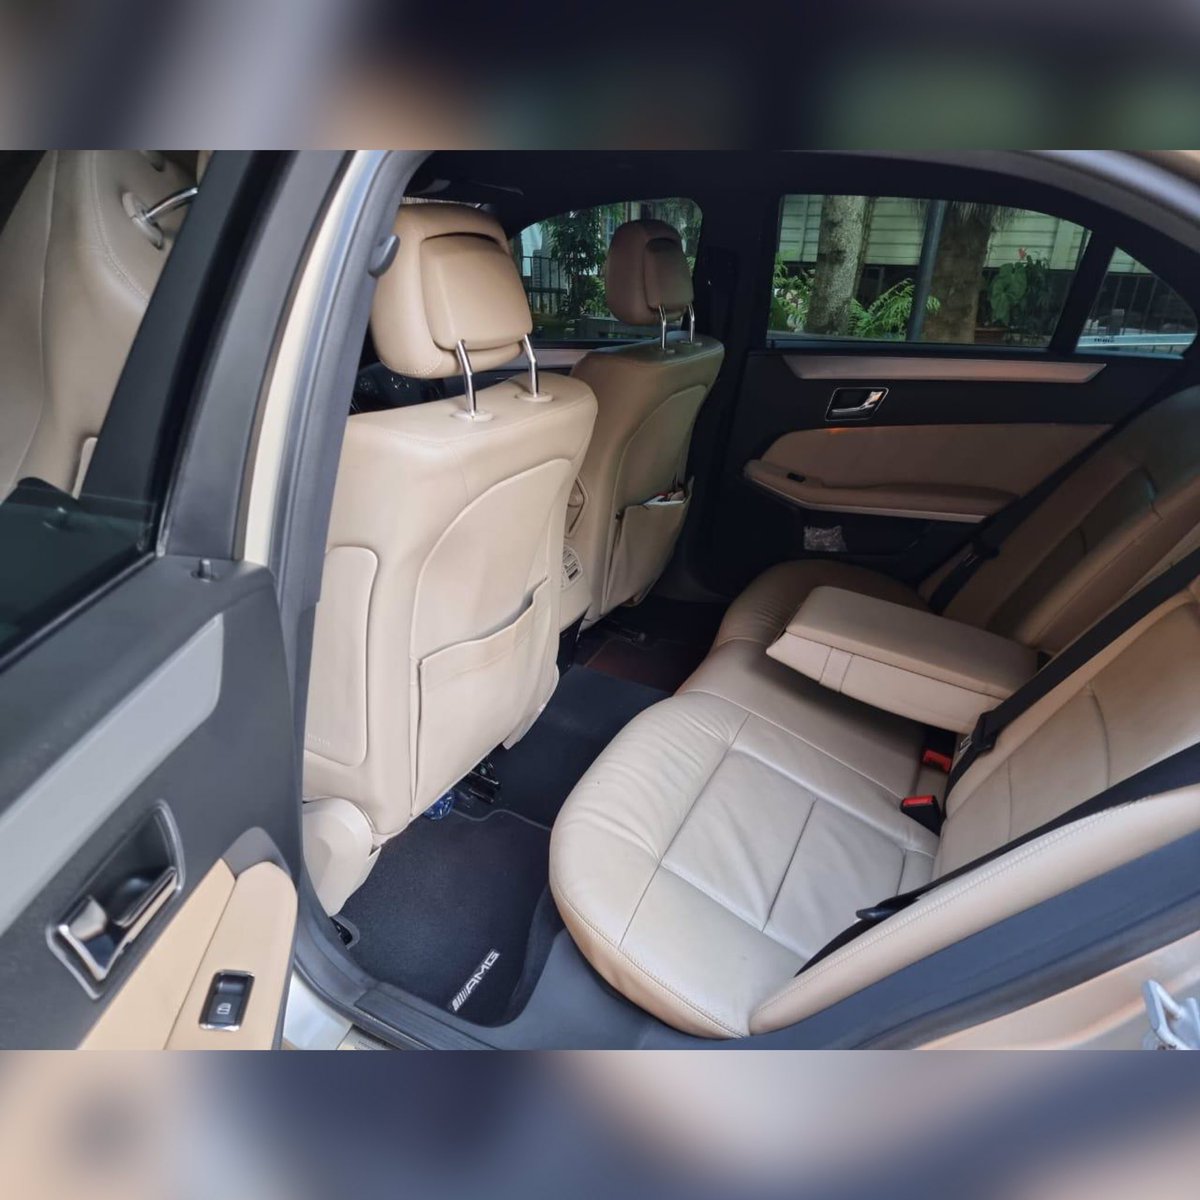 Mercedes Benz :: E350 :: Year 2009:: 3450cc  :: AvantGarde Sport  ::  Leather Interior :: 
✅Cash Offer Kshs 2.2M
🔥LipaPolePole🔥
✅Bank Asset from 70% and up to 5 Years Repayment.